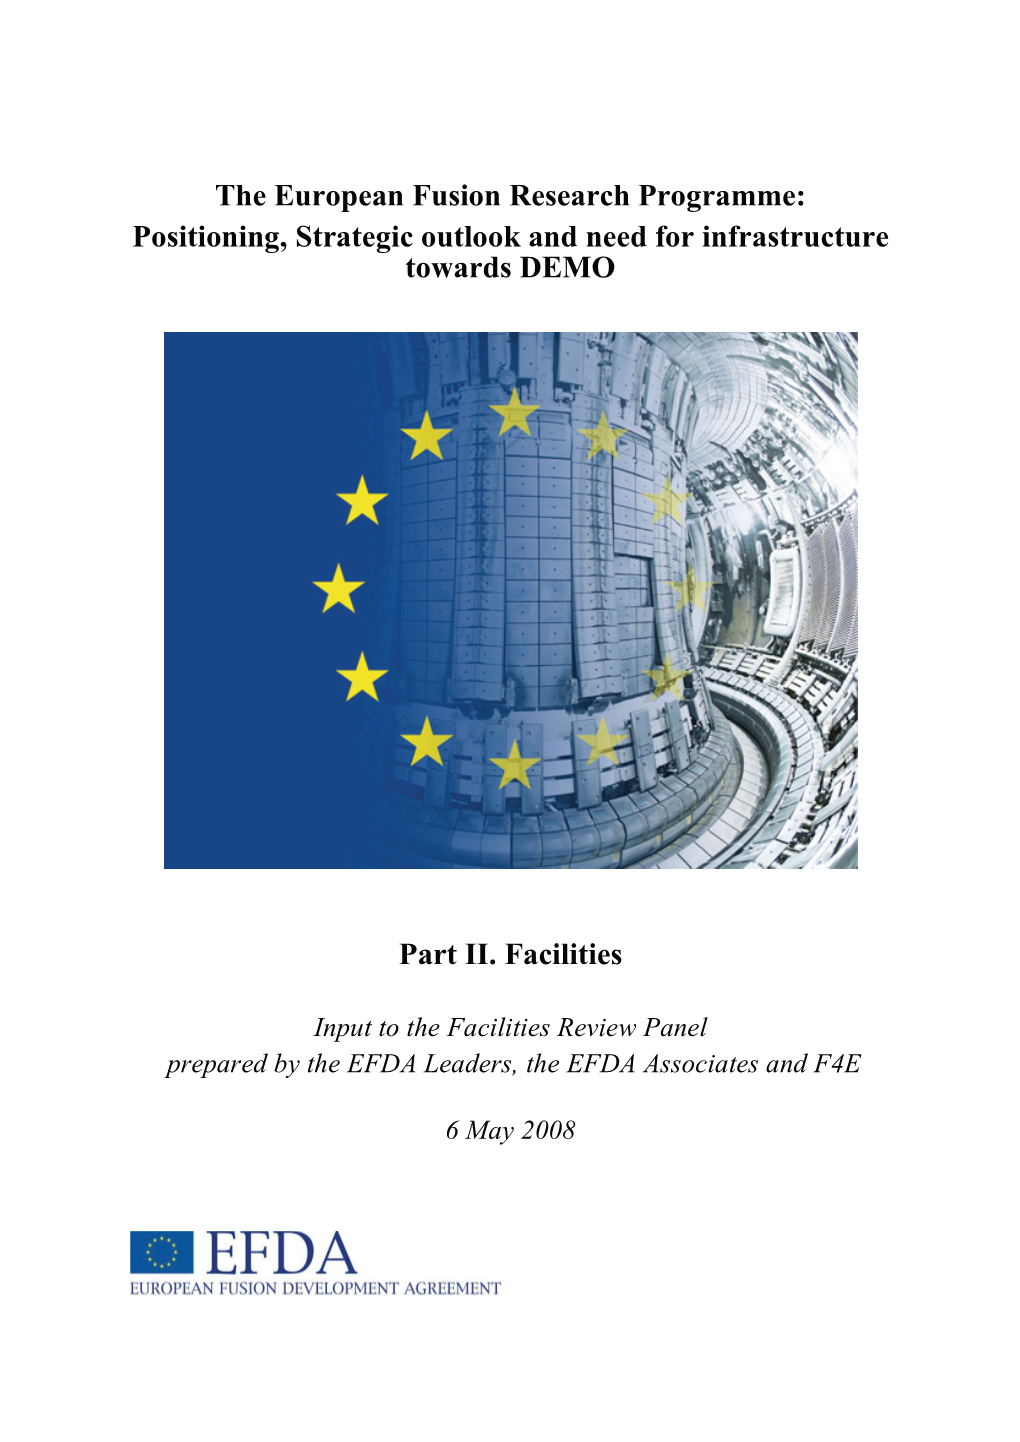 The European Fusion Research Programme: Positioning, Strategic Outlook and Need for Infrastructure Towards DEMO